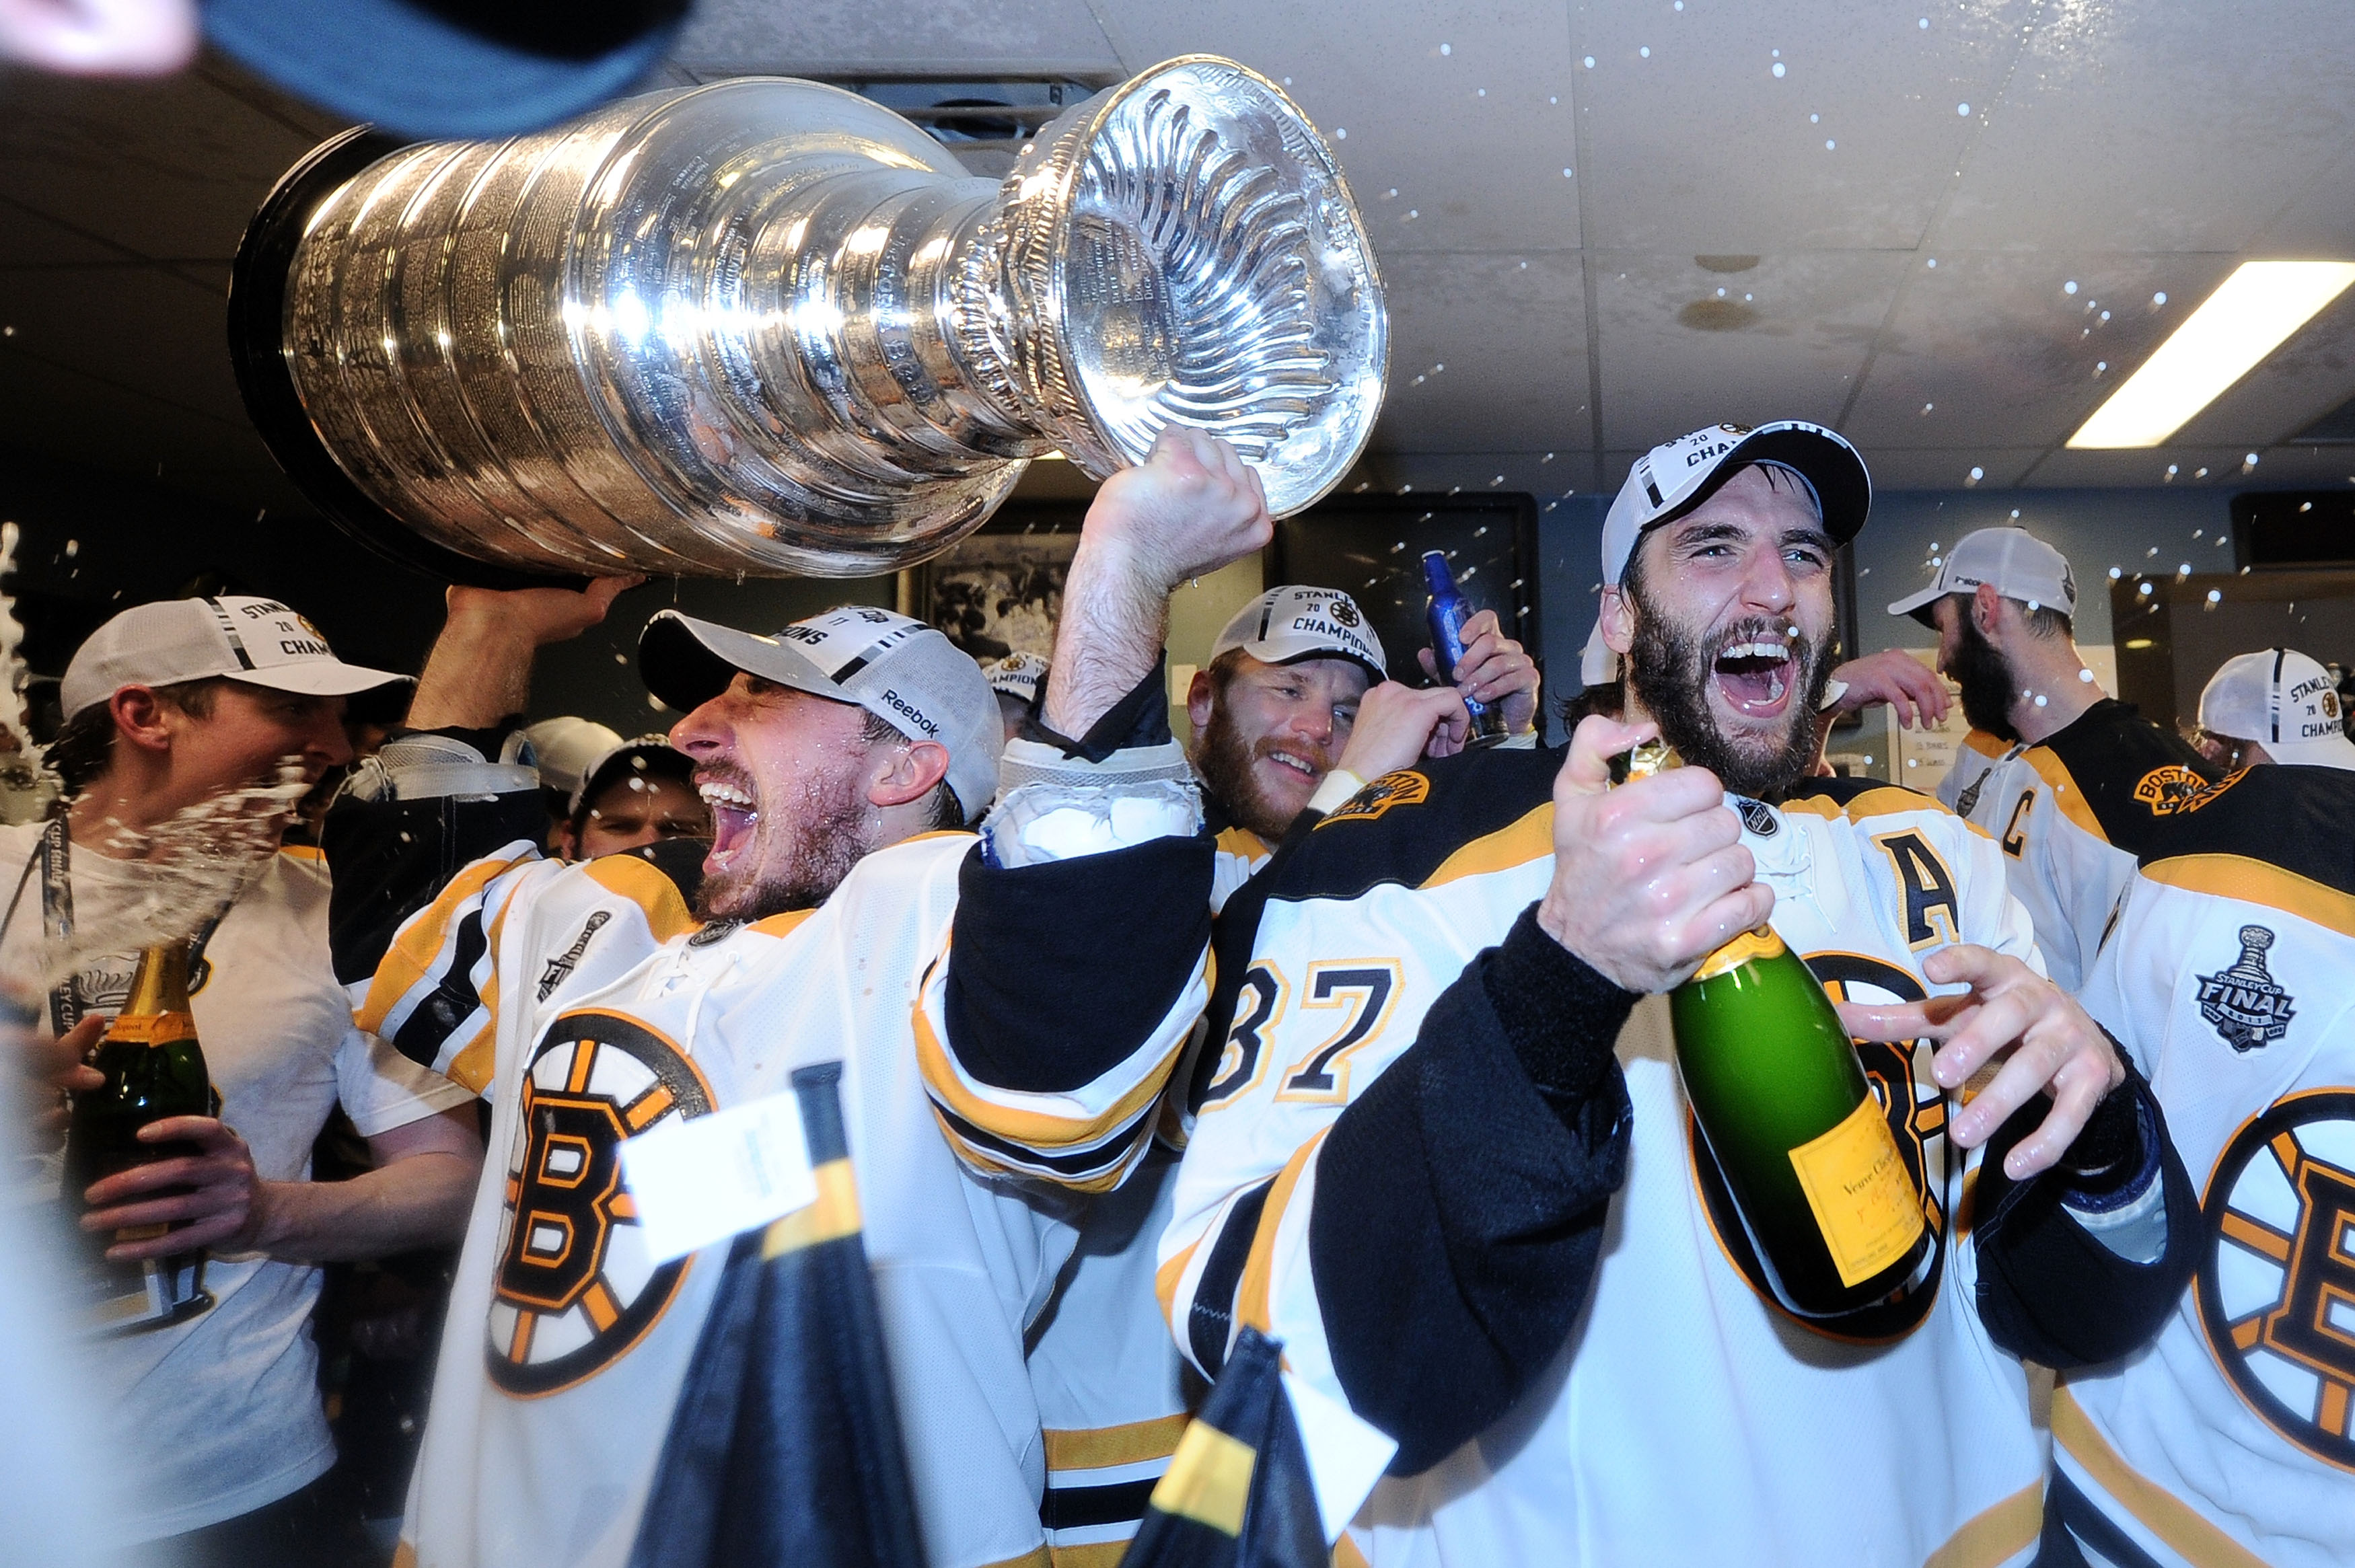 Sports Top 10 of 2011: The Bruins bring home the Stanley Cup